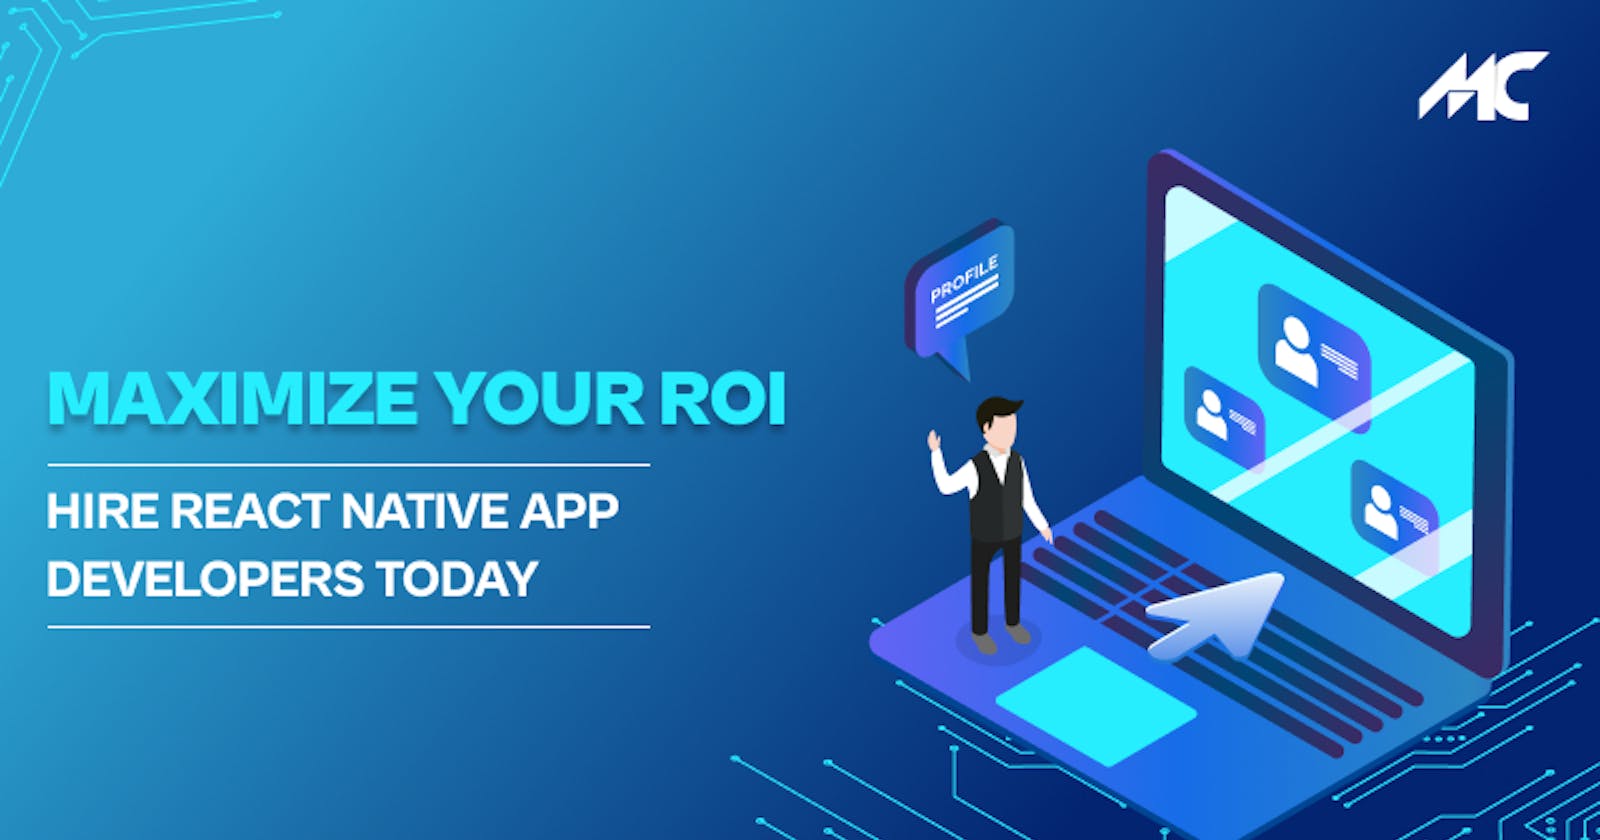 Maximise Your ROI: Hire React Native App Developers Today